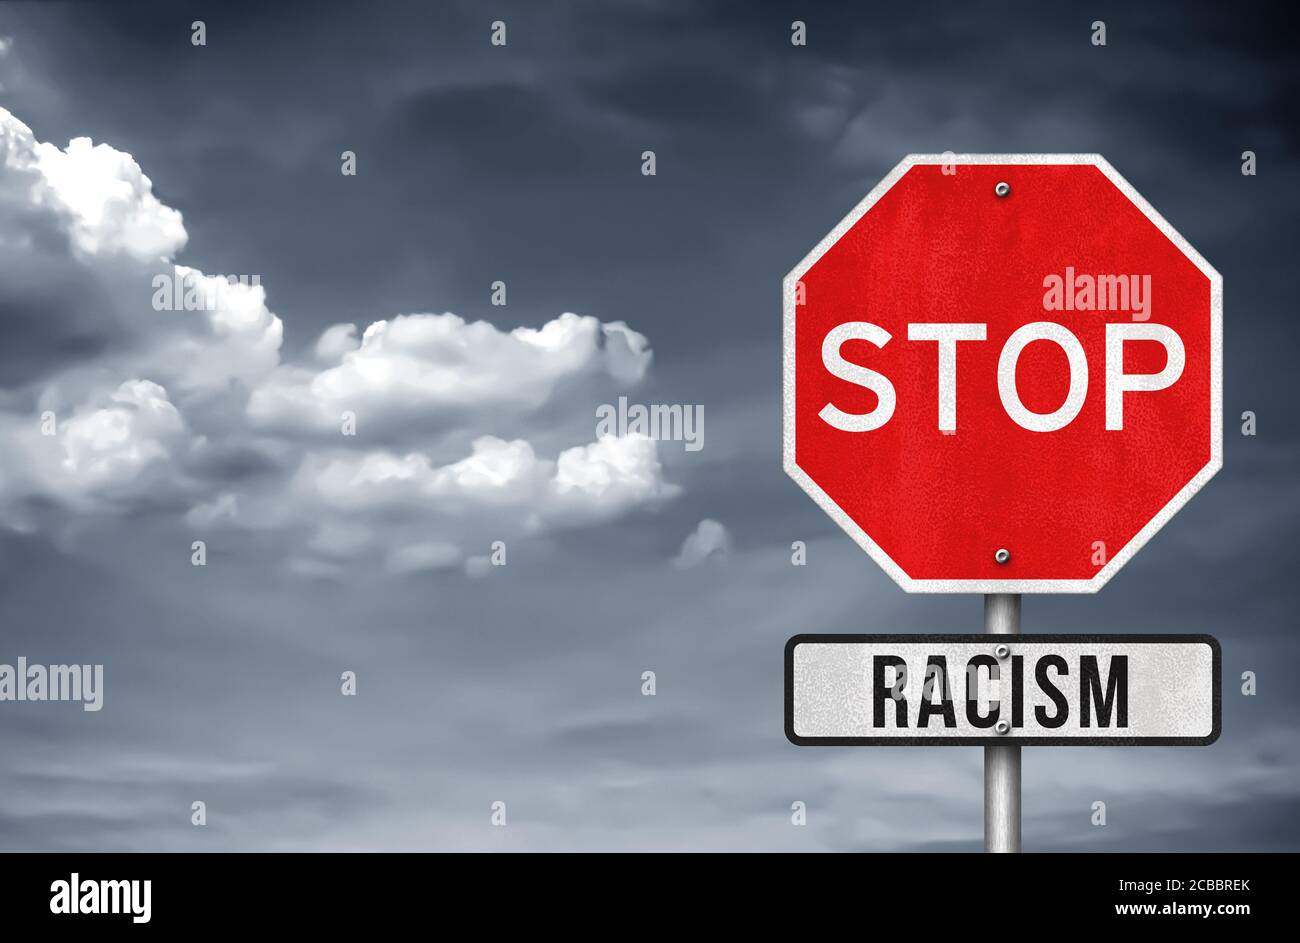 Stop Racism - road sign concept Stock Photo